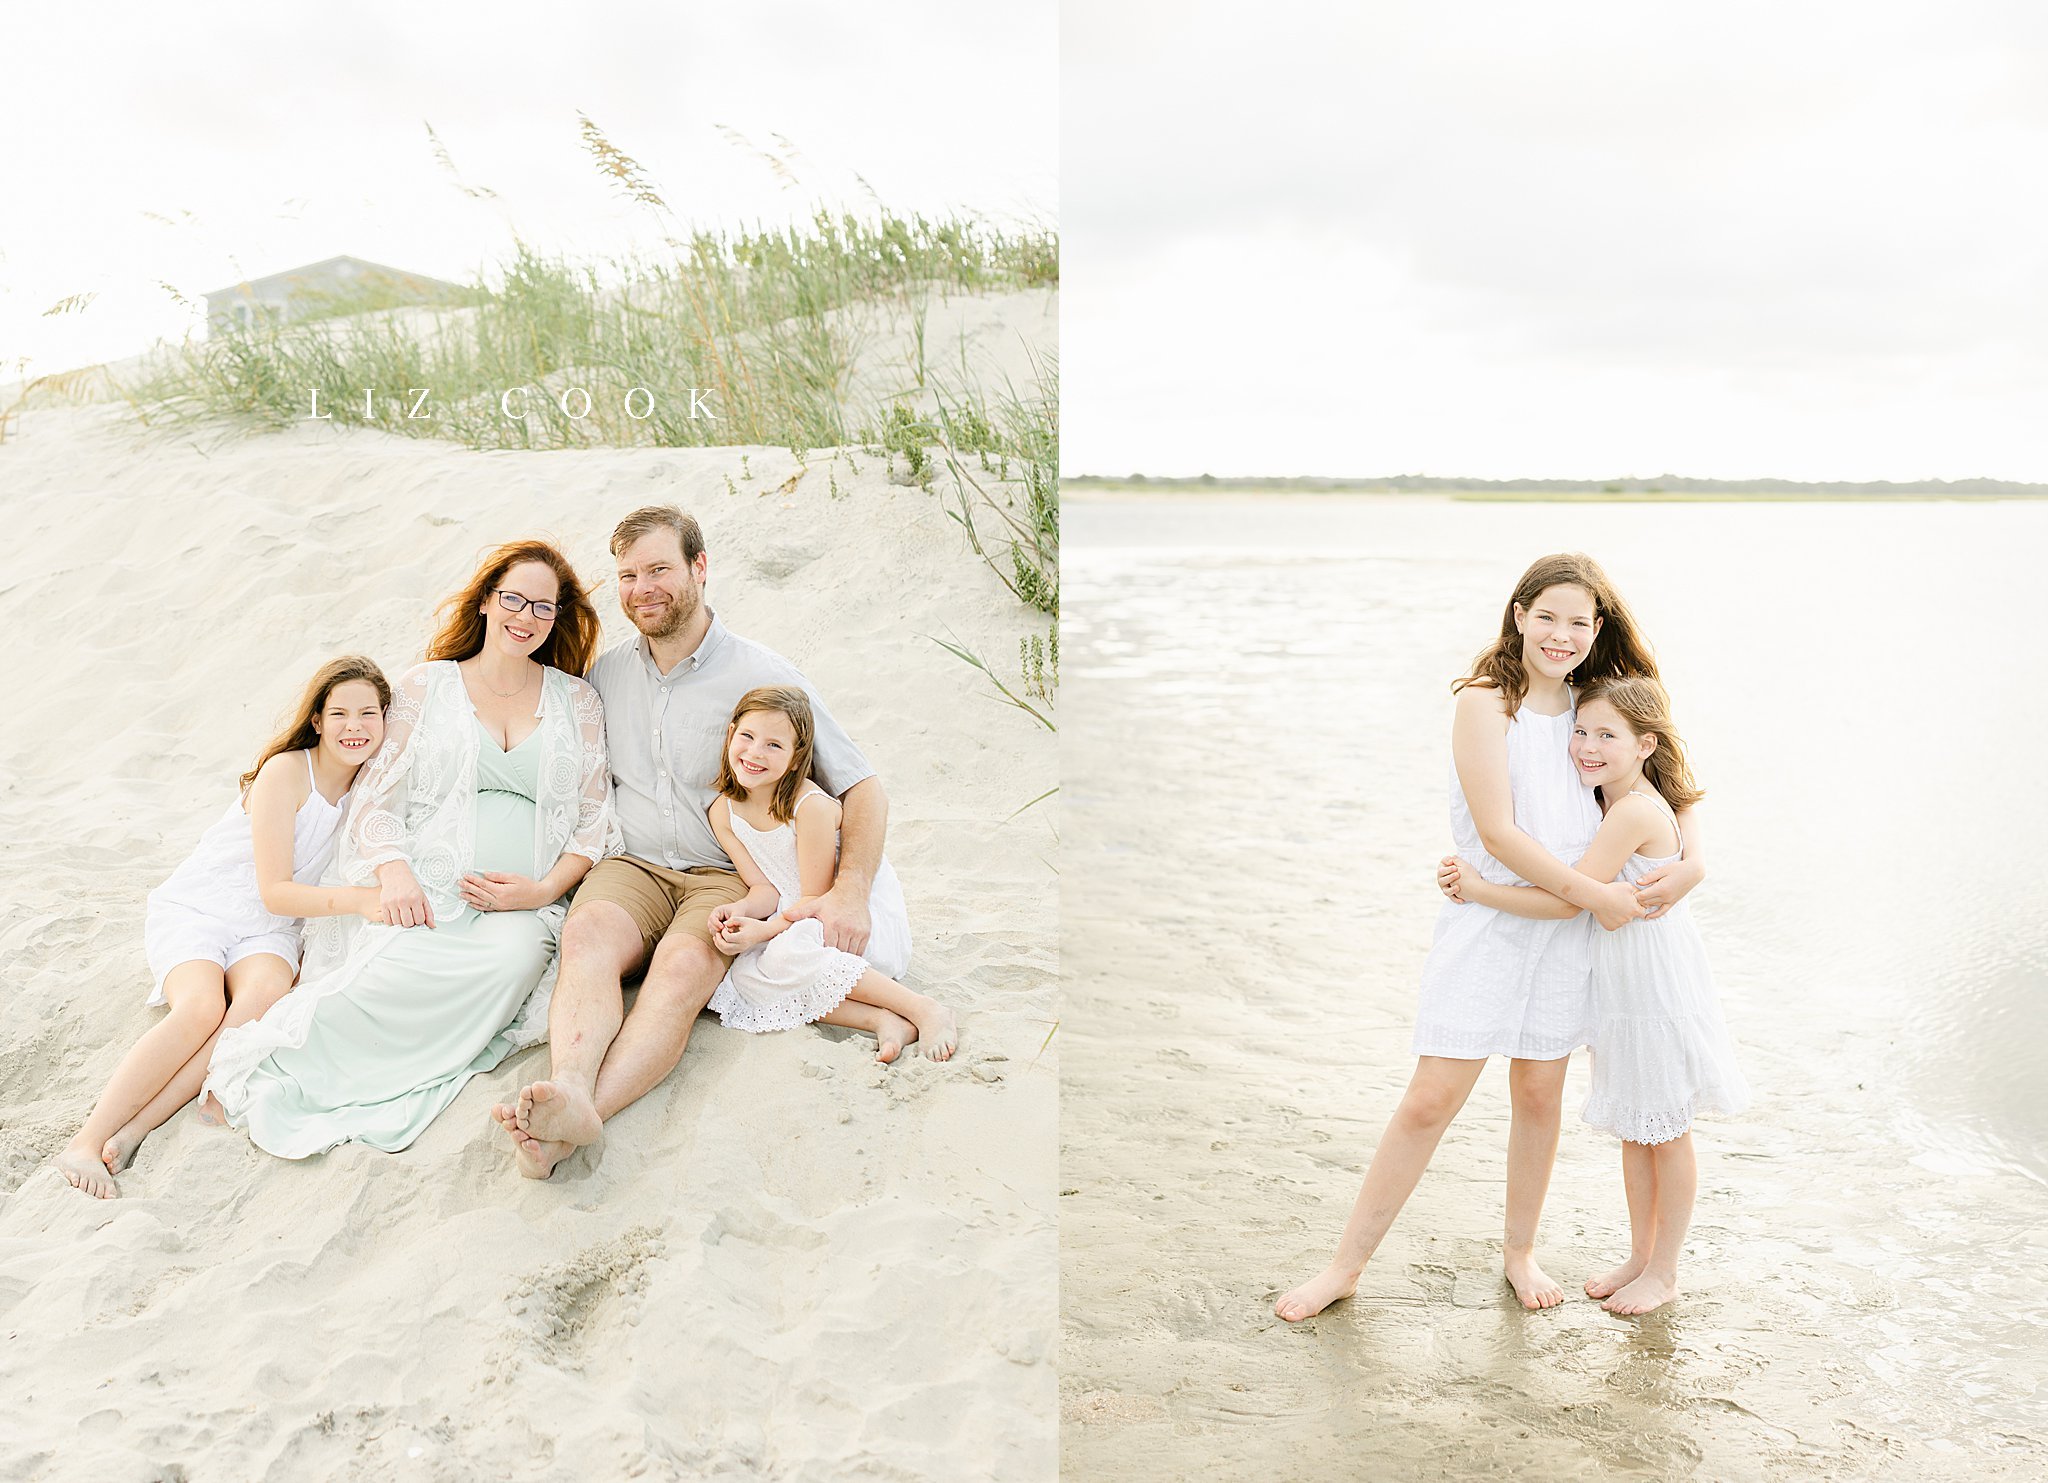 maternity-pictures-on-beach-liz-cook-photography-caroline-jean-photography_0011.jpg